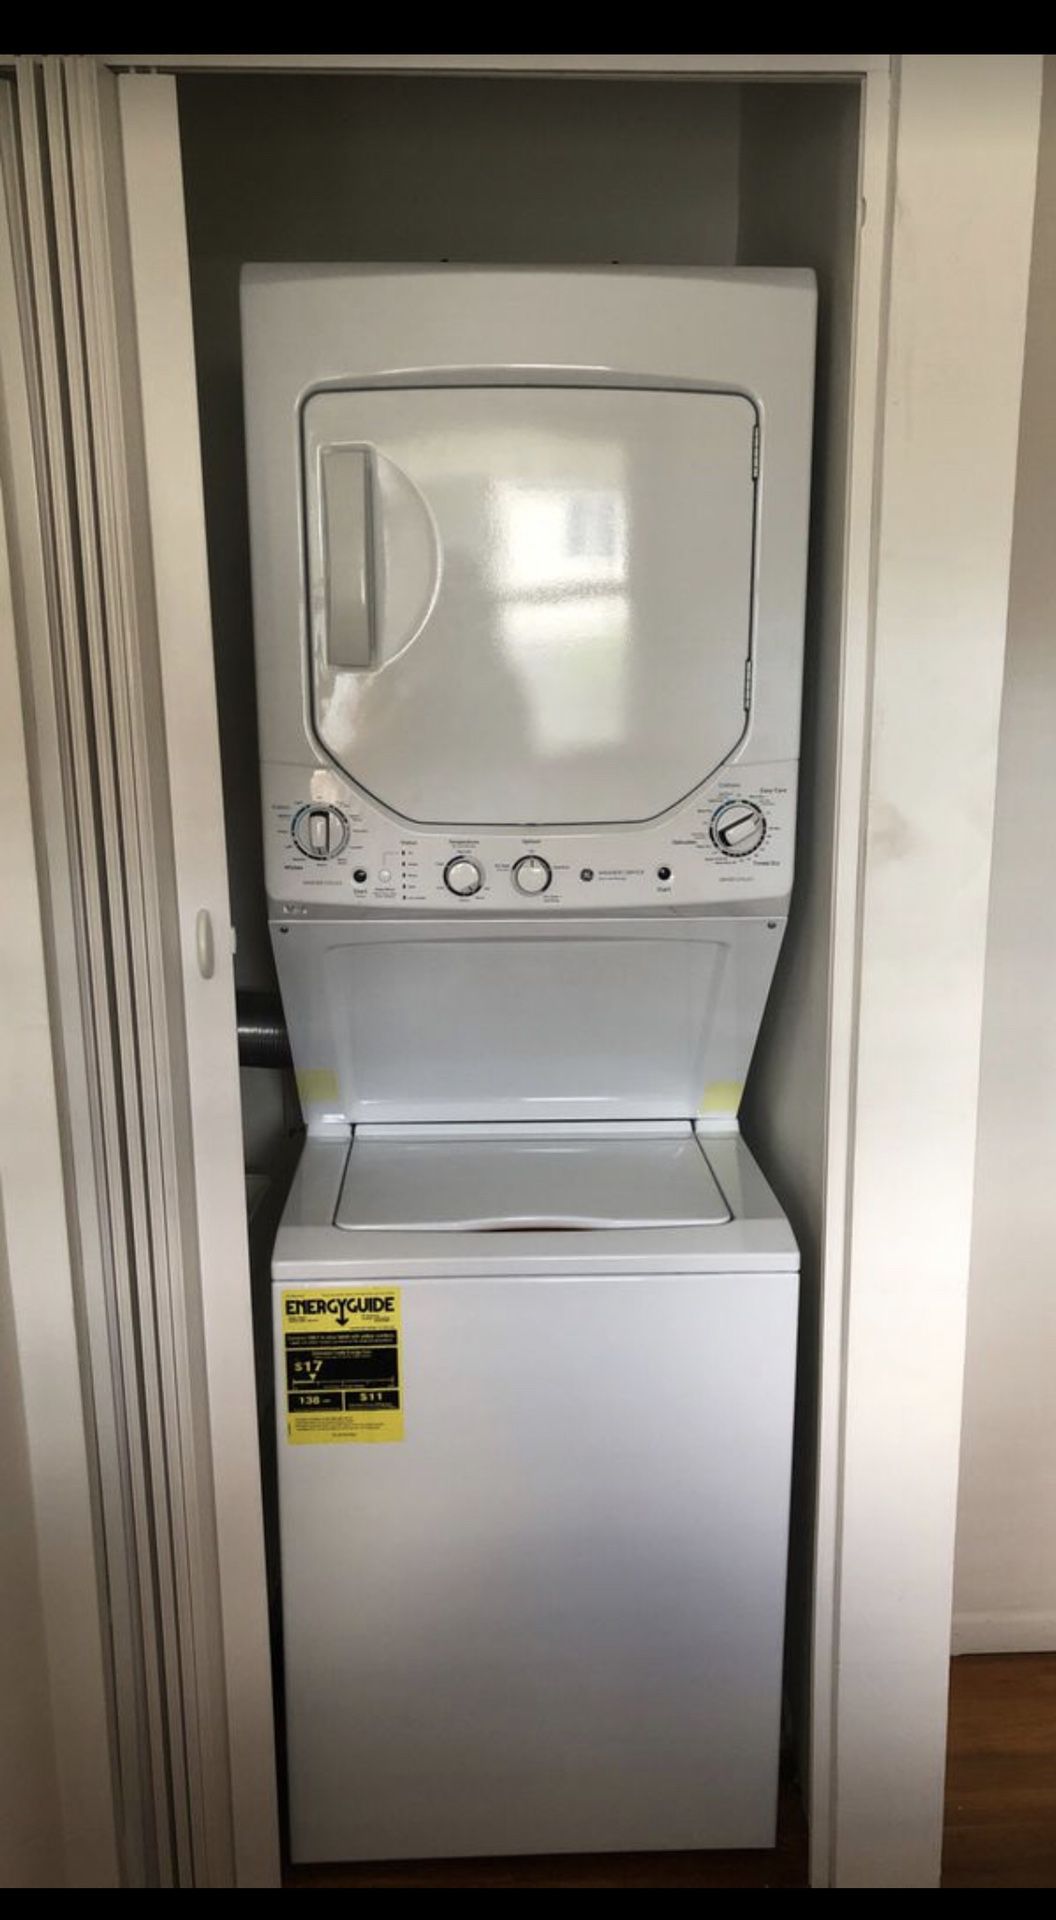 GE washer dryer combo electric